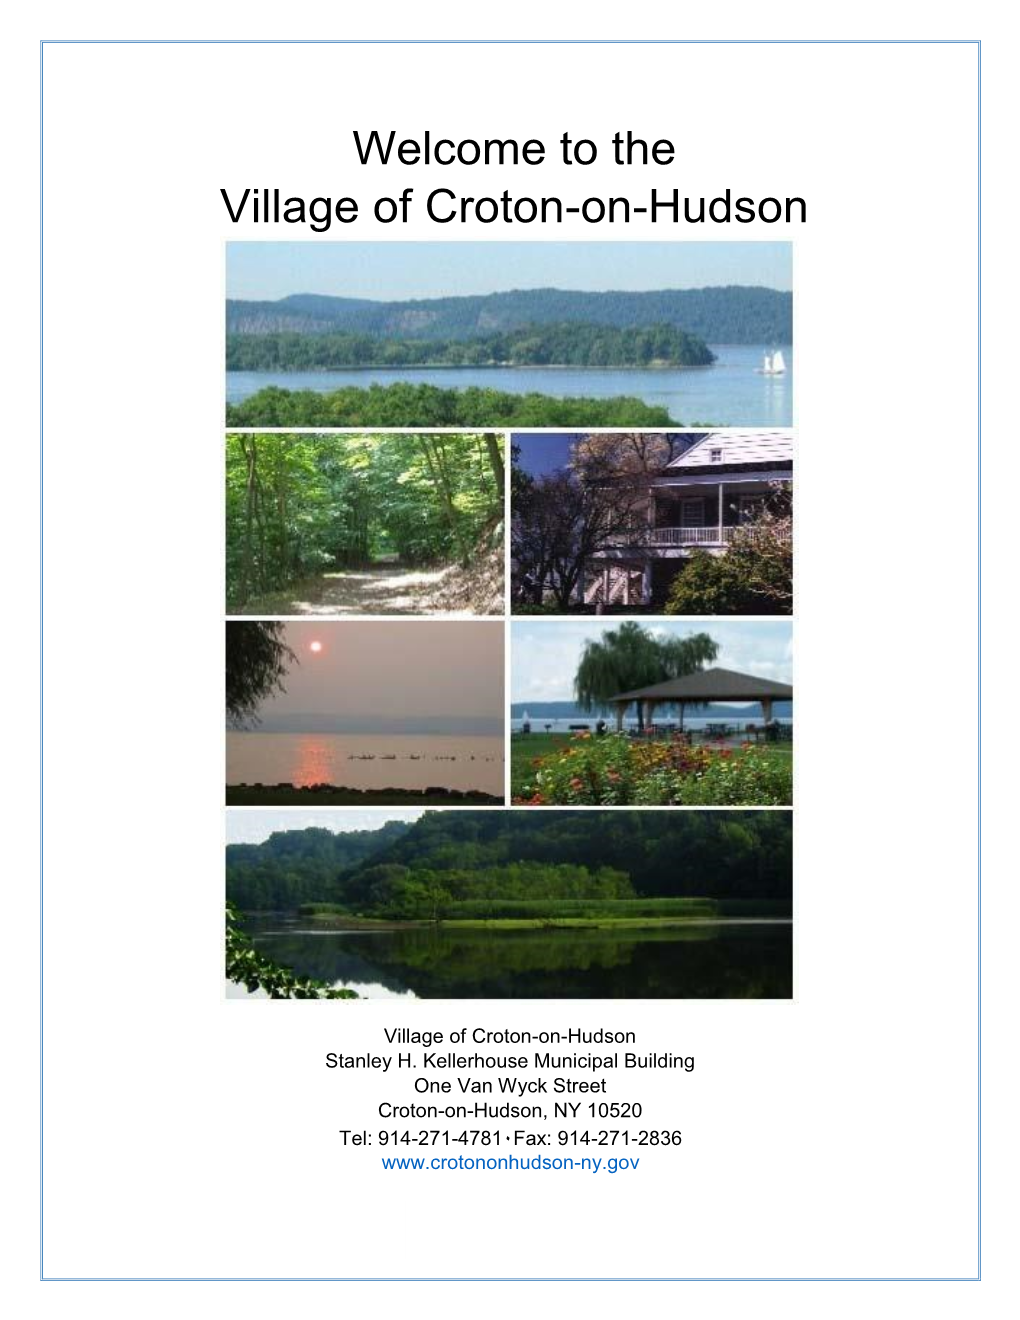 Welcome to the Village of Croton-On-Hudson